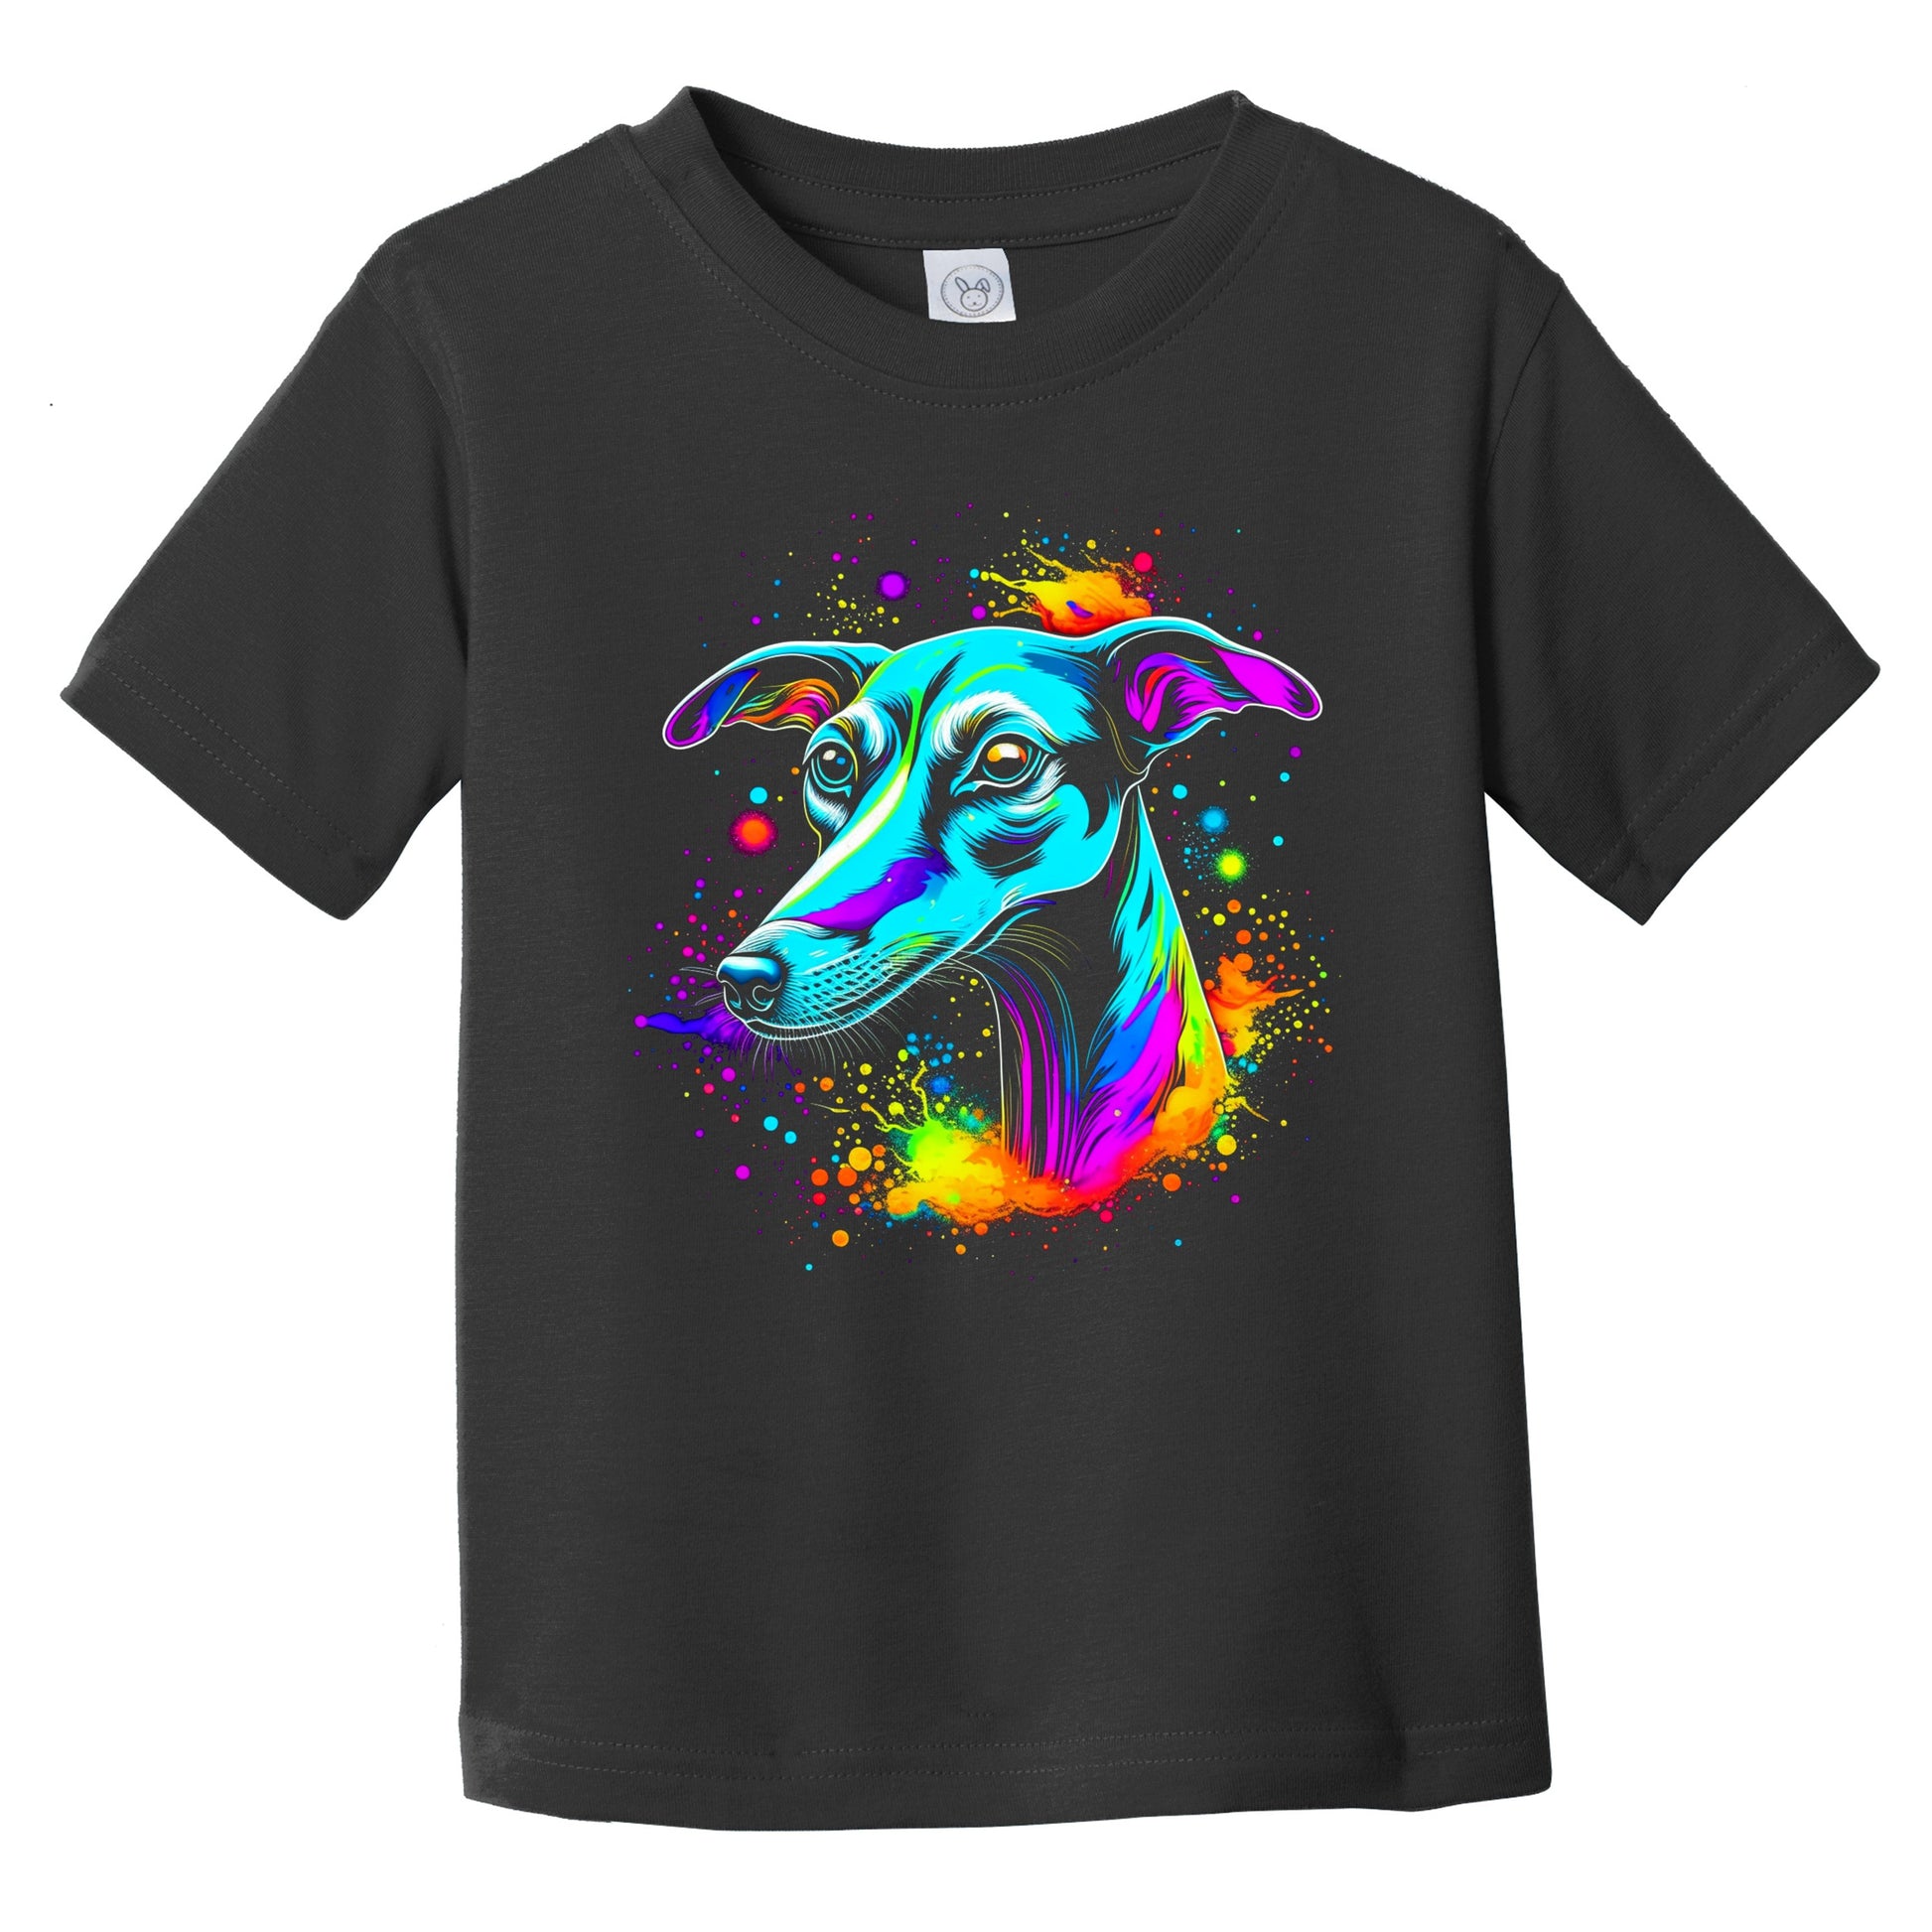 Colorful Bright Whippet Vibrant Psychedelic Dog Art Infant Toddler T-Shirt